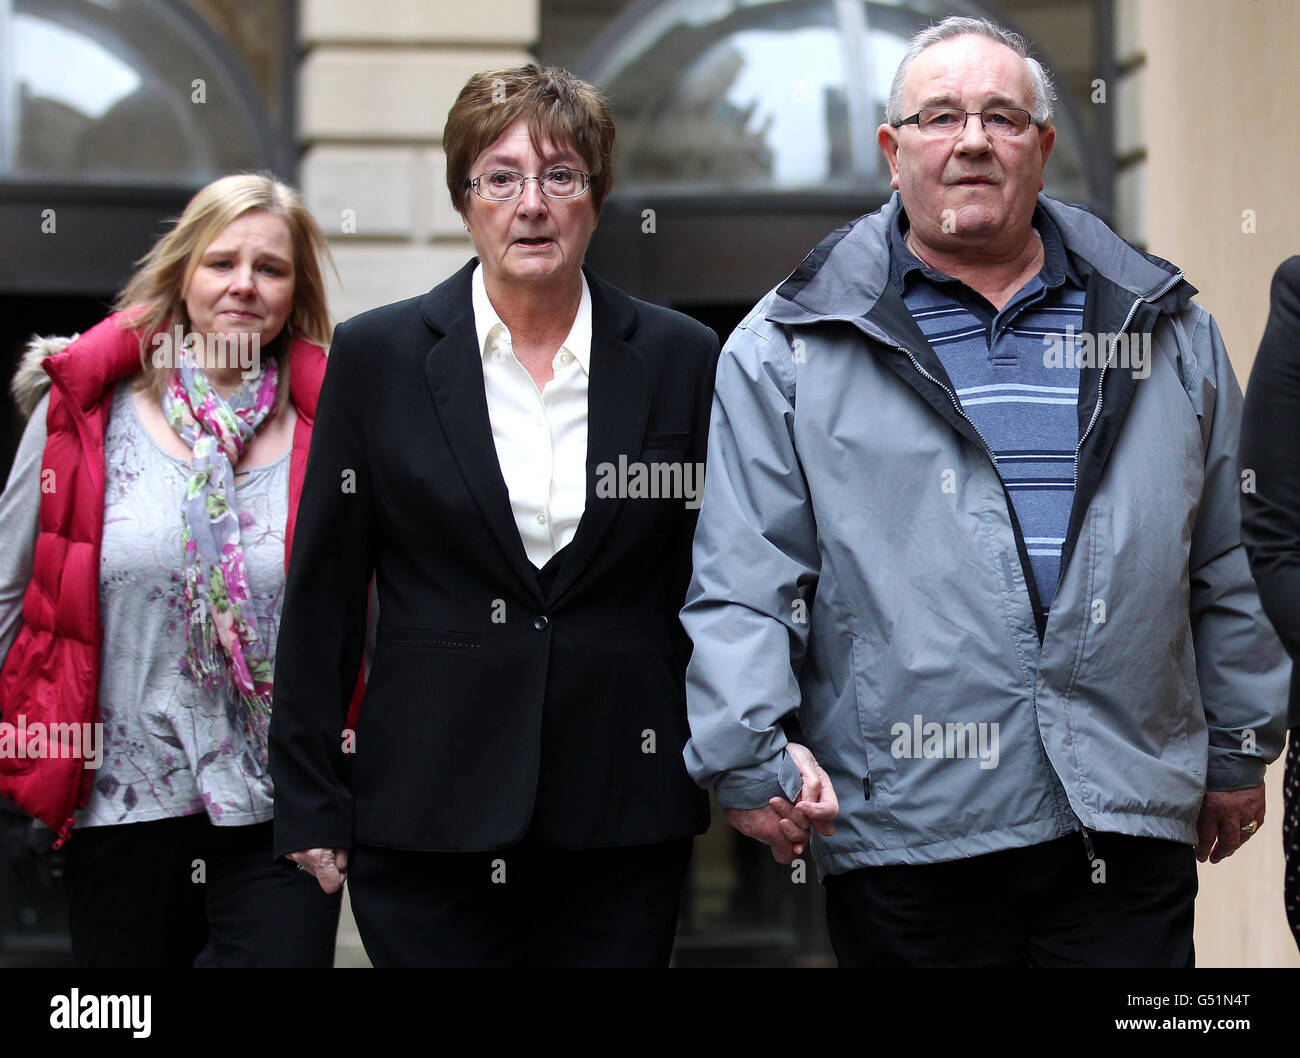 Robert and Sylvia with daughter Gail, parents and sister of Suzanne Pilley, leaves Edinburgh High Court after David Gilroy was found guilty of of carrying out the killing of Suzanne by 'unknown means' on May 4 2010. PRESS ASSOCIATION Photo. Picture date: Thursday March 15, 2012. Book-keeper Suzanne, 38, vanished without trace nearly two years ago after making a routine journey to work in Edinburgh city centre. See PA story COURTS Pilley. Photo credit should read: Andrew Milligan/PA Wire Stock Photo